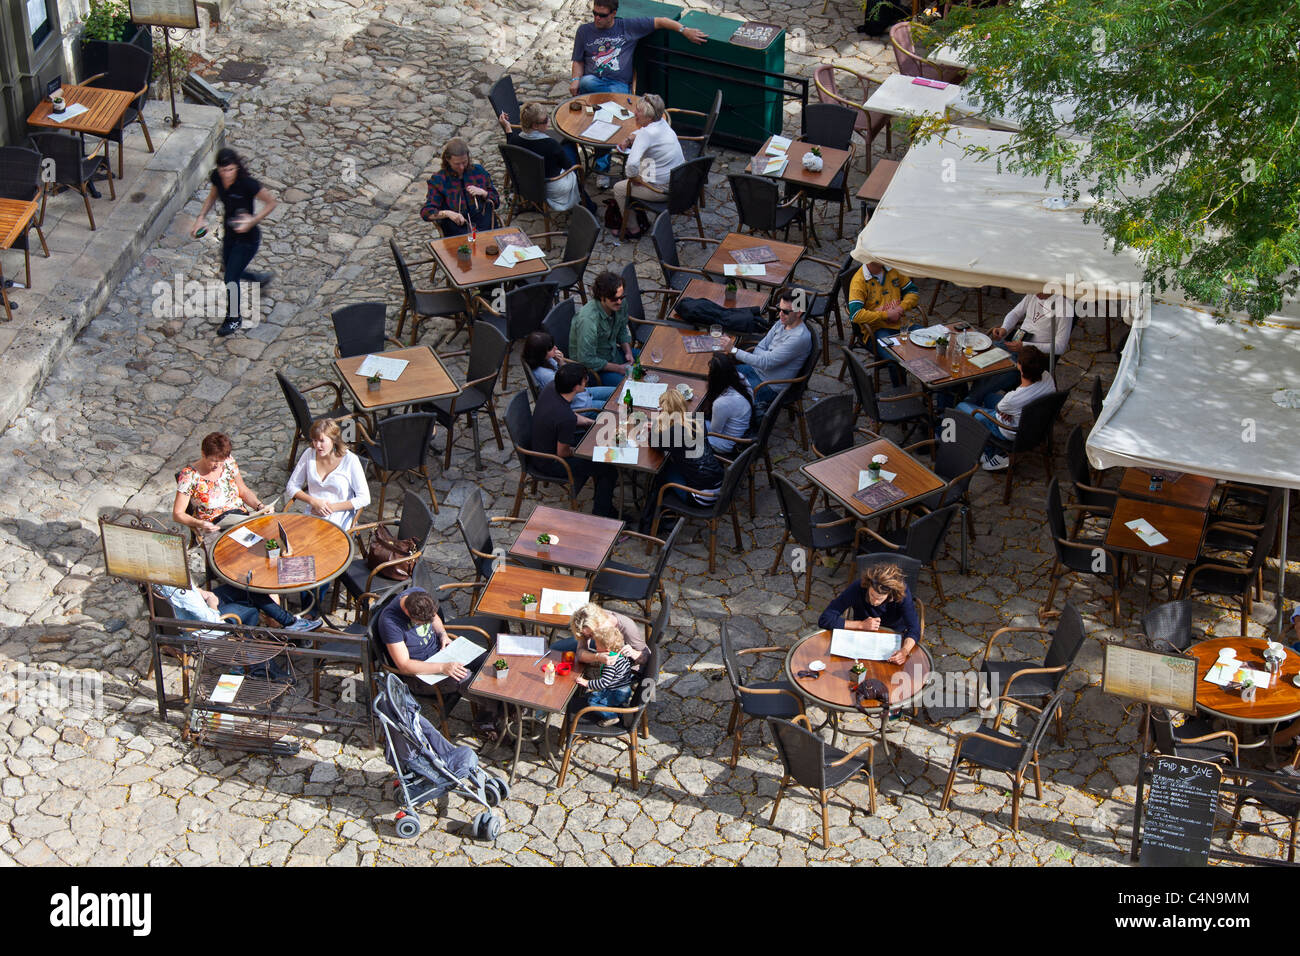 Diners at pavement cafe and cobbled pavement in St Emilion, Bordeaux region of France Stock Photo